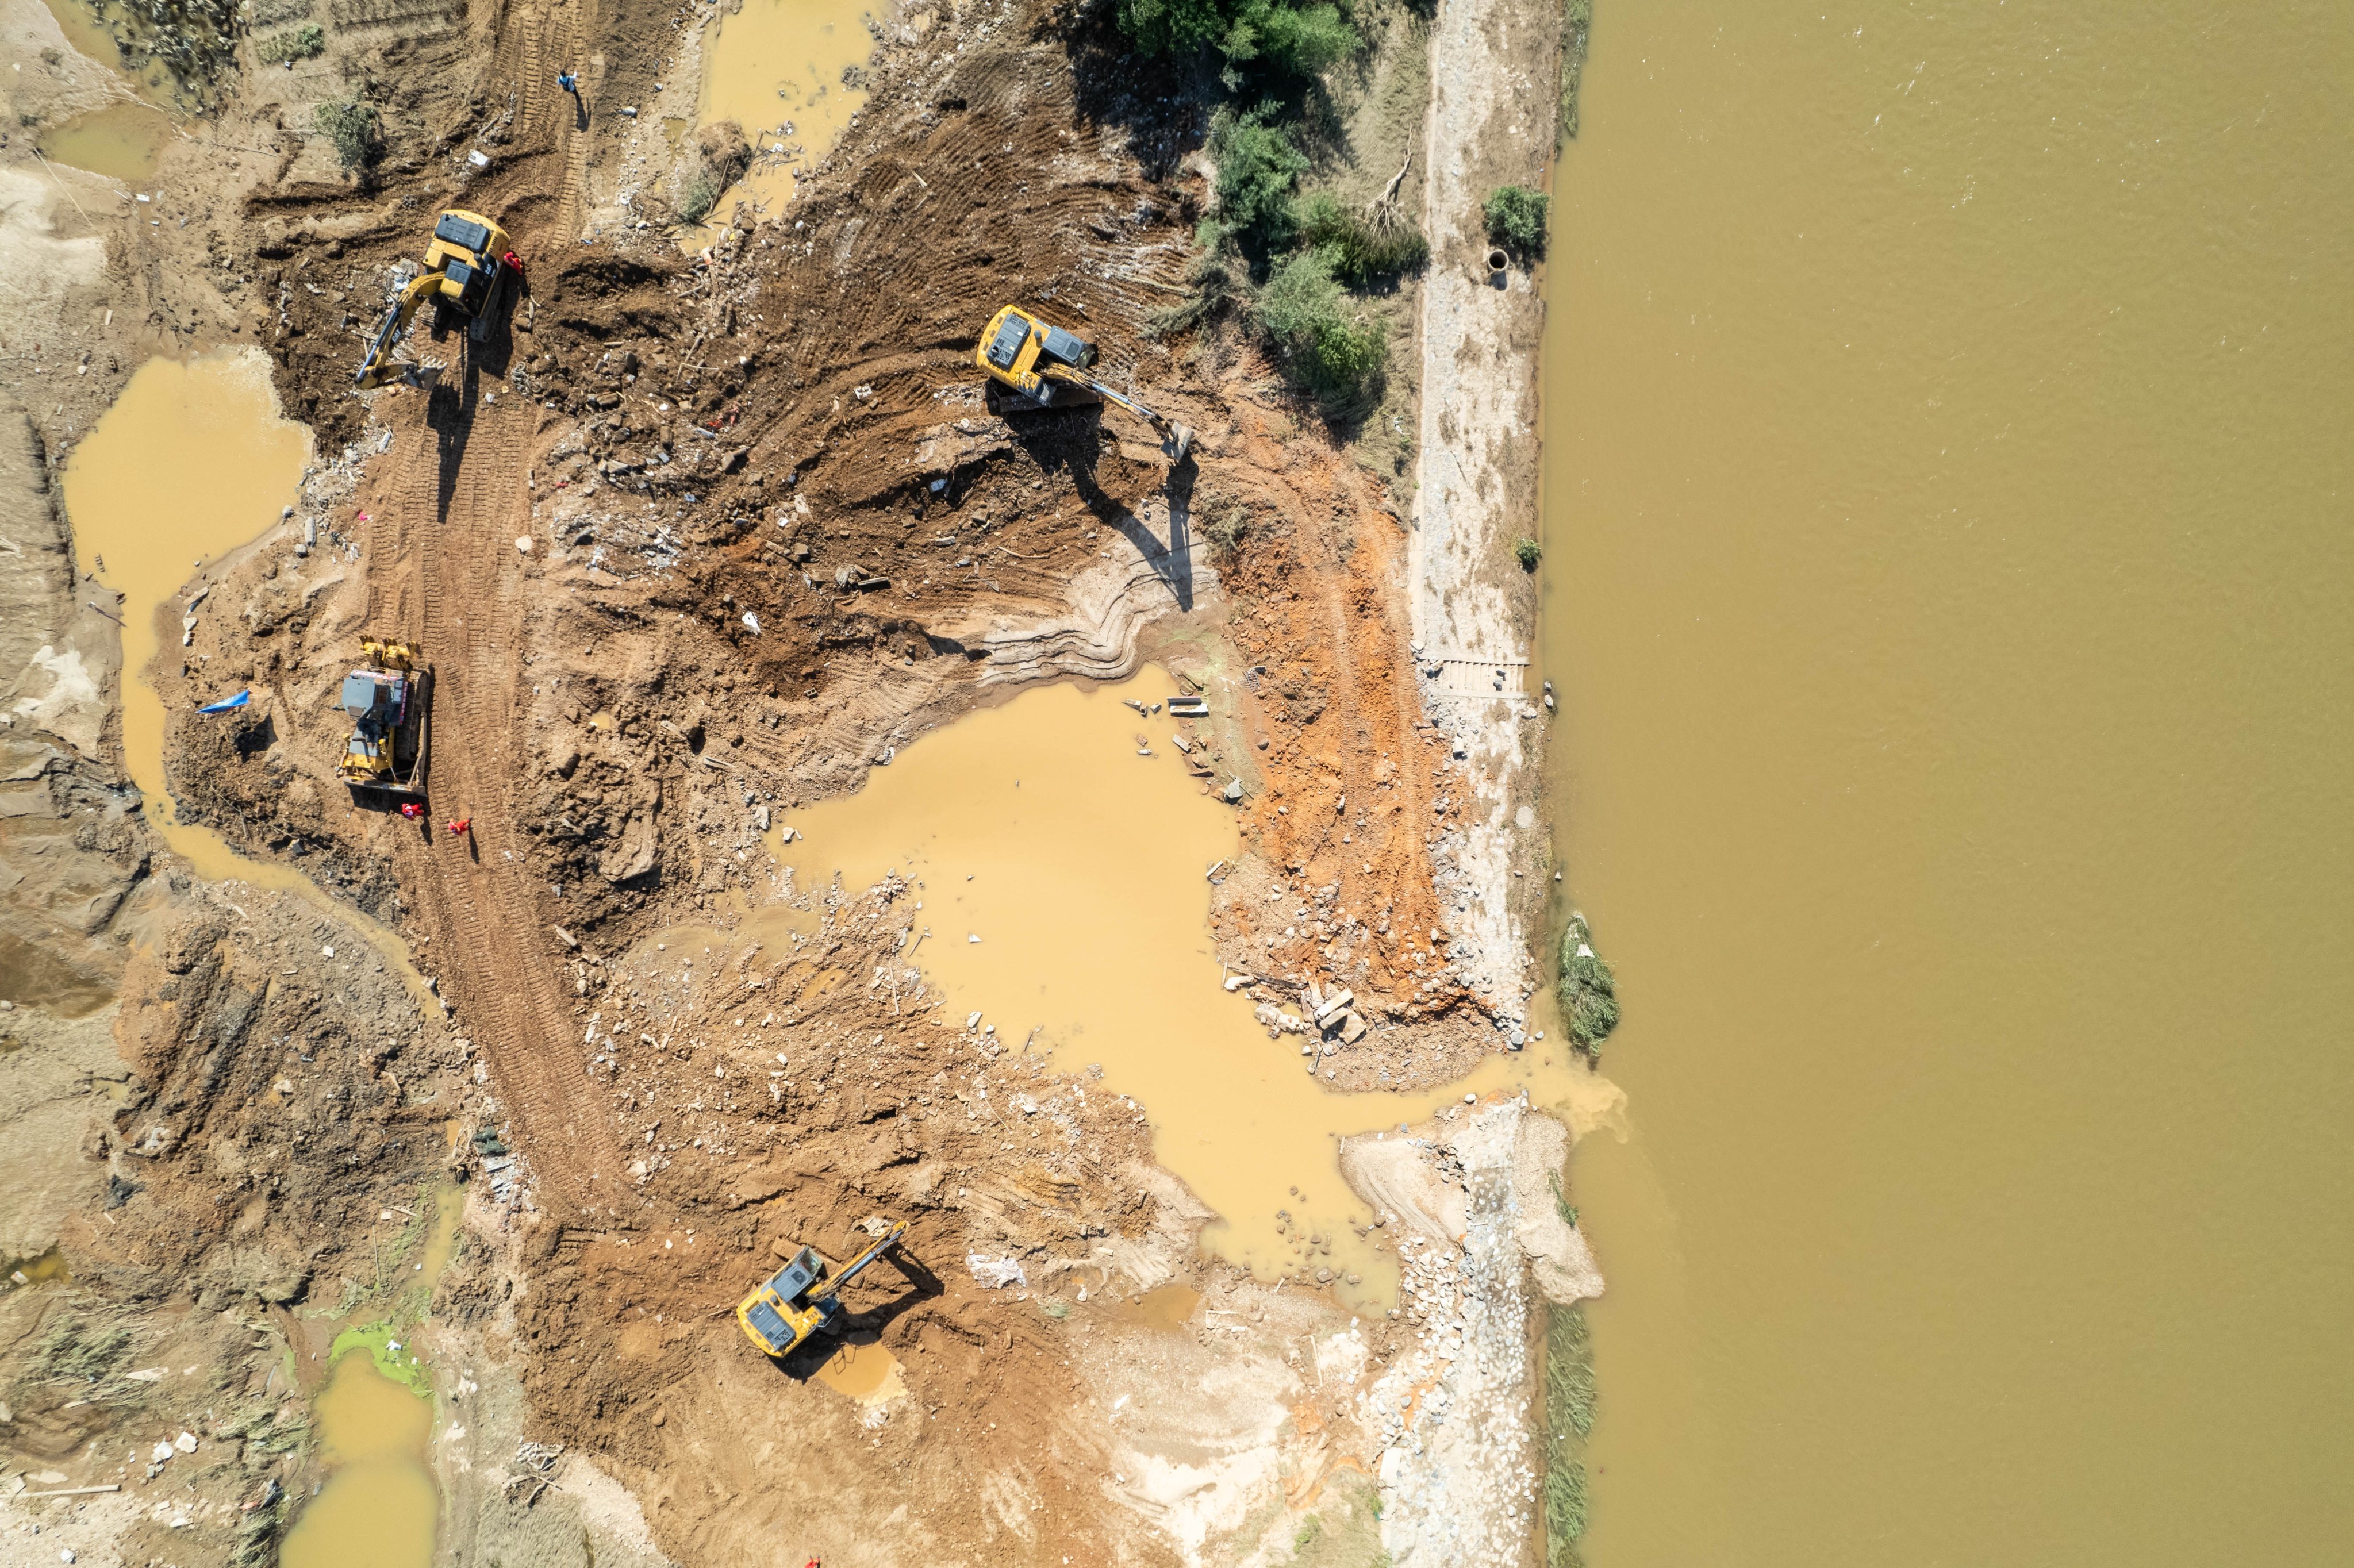 Emergency workers repairing a breached dike in the Juanshui River in central China’s Hunan province on Wednesday. The breach occurred on Sunday after heavy rainfall hit the province. Photo: Xinhua/EPA-EFE